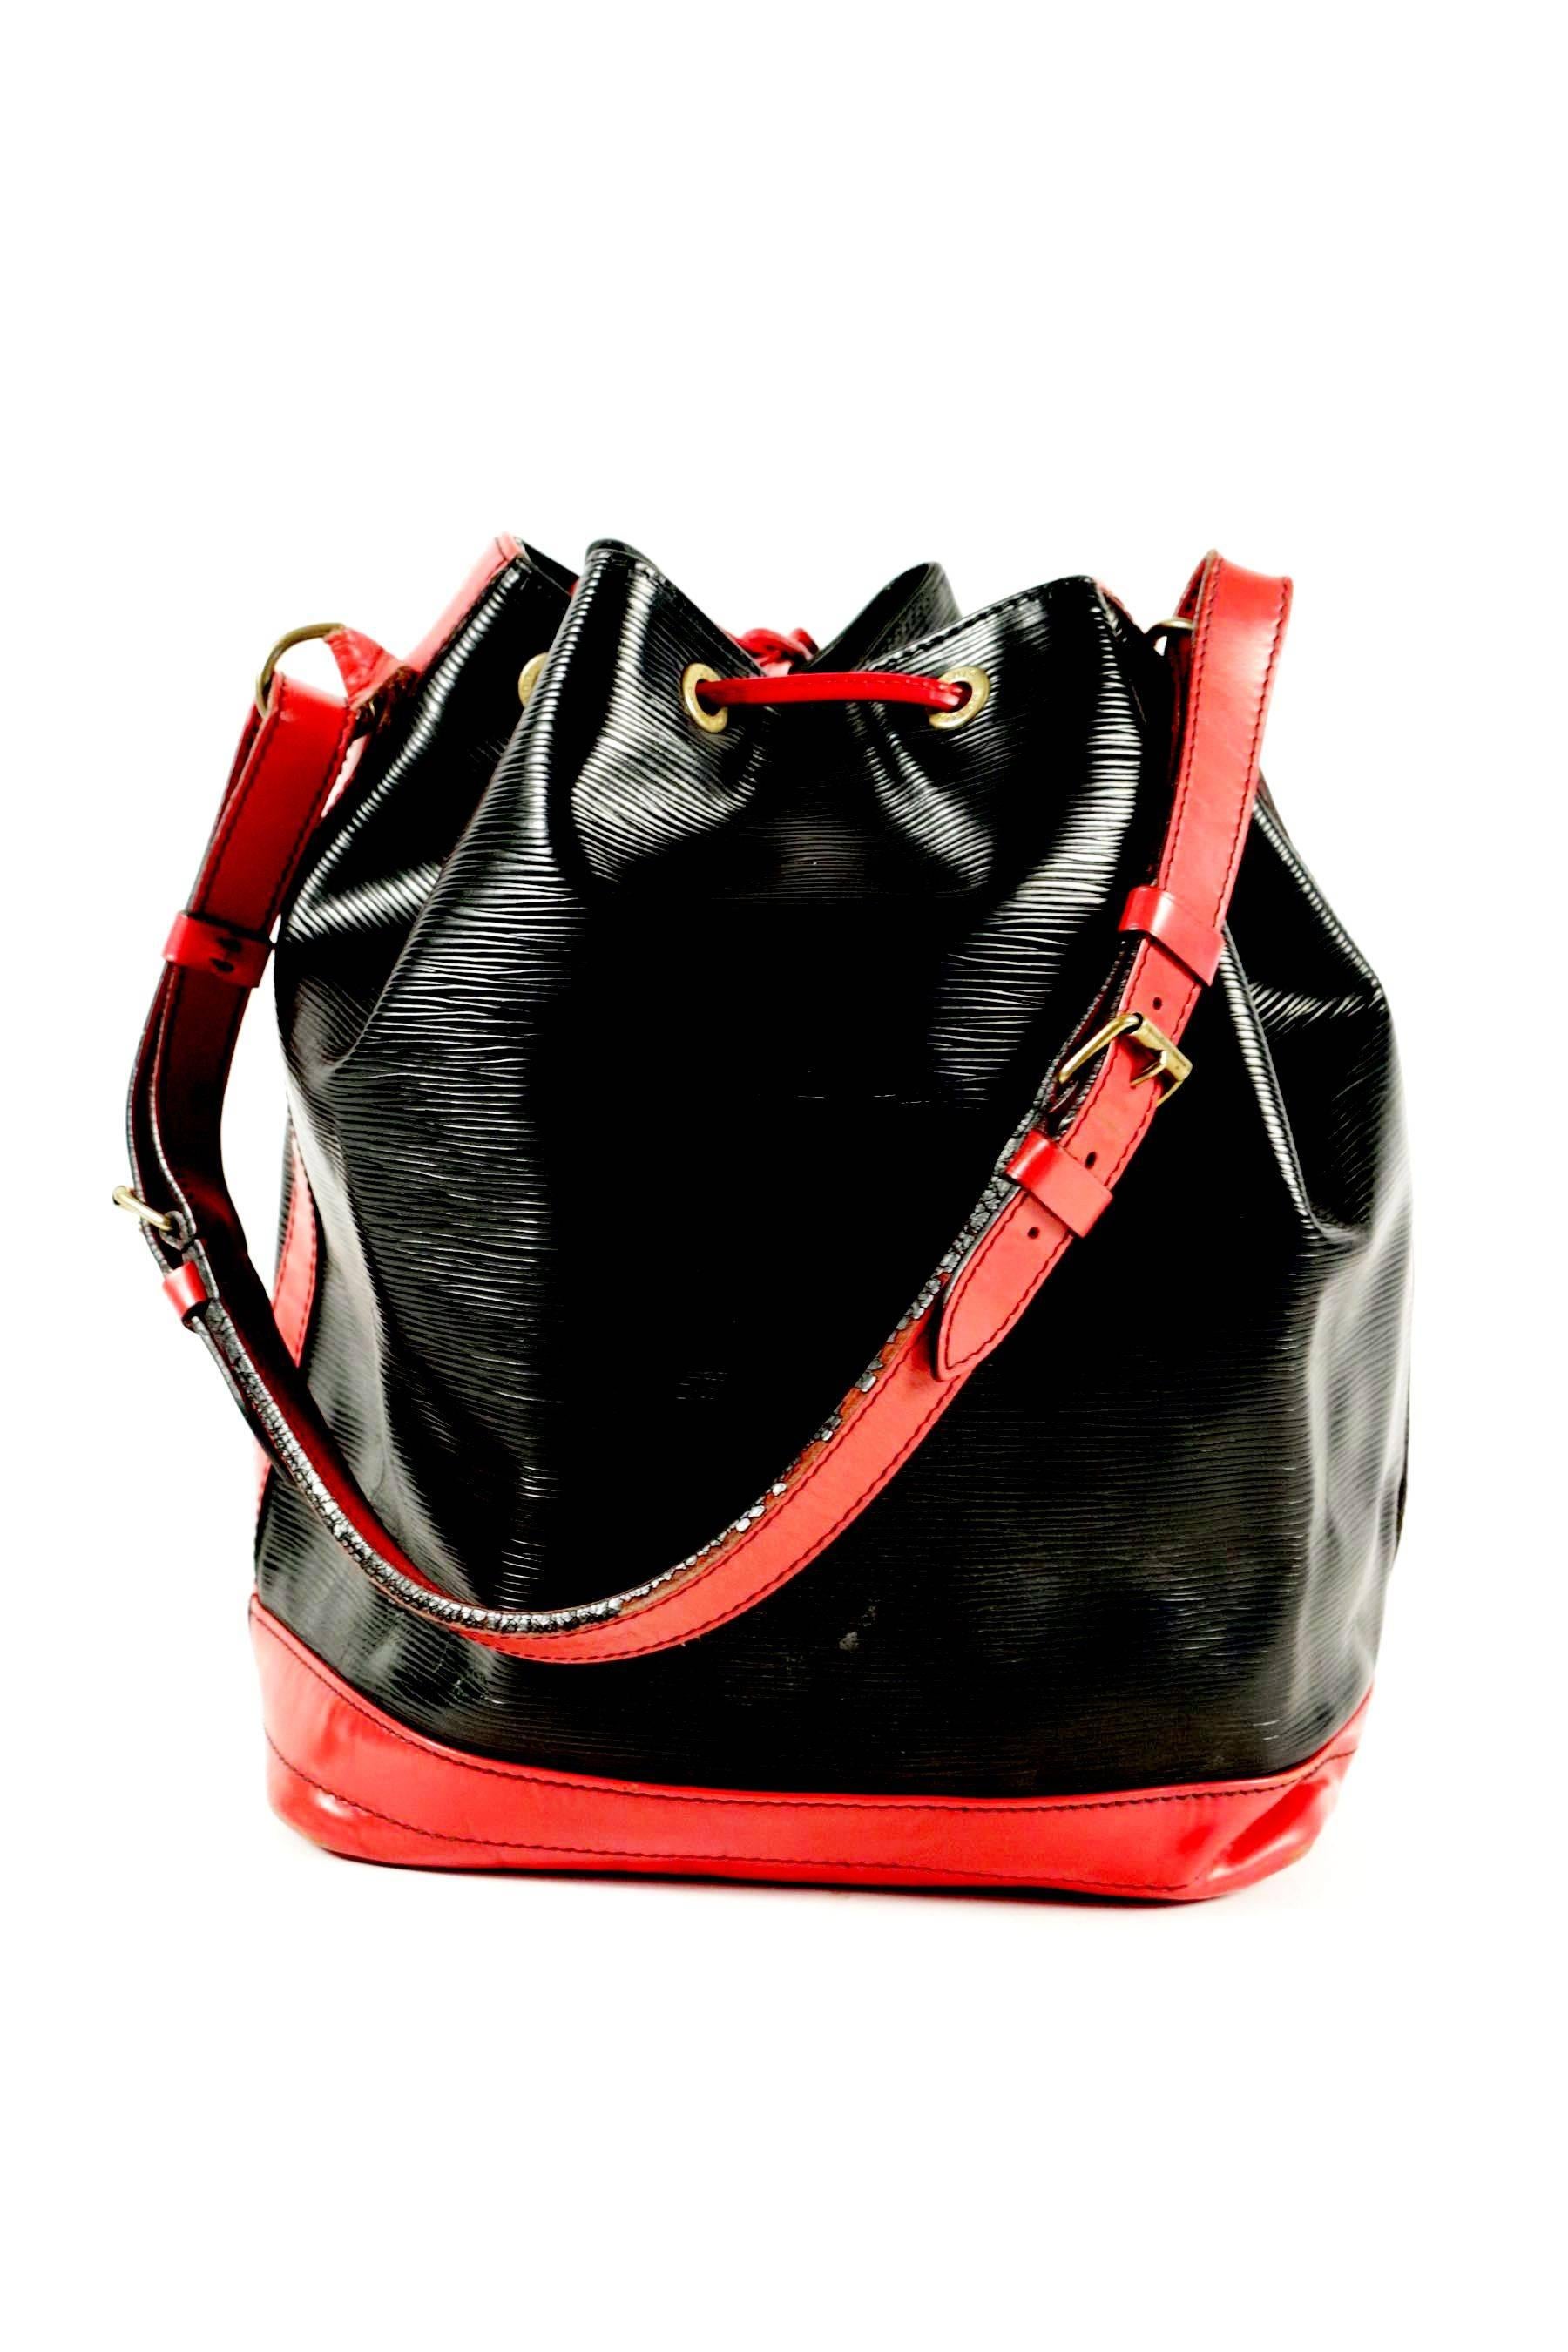 Vintage Louis Vuitton Grand Noe Bag, Epi Leather, Black and Red 1